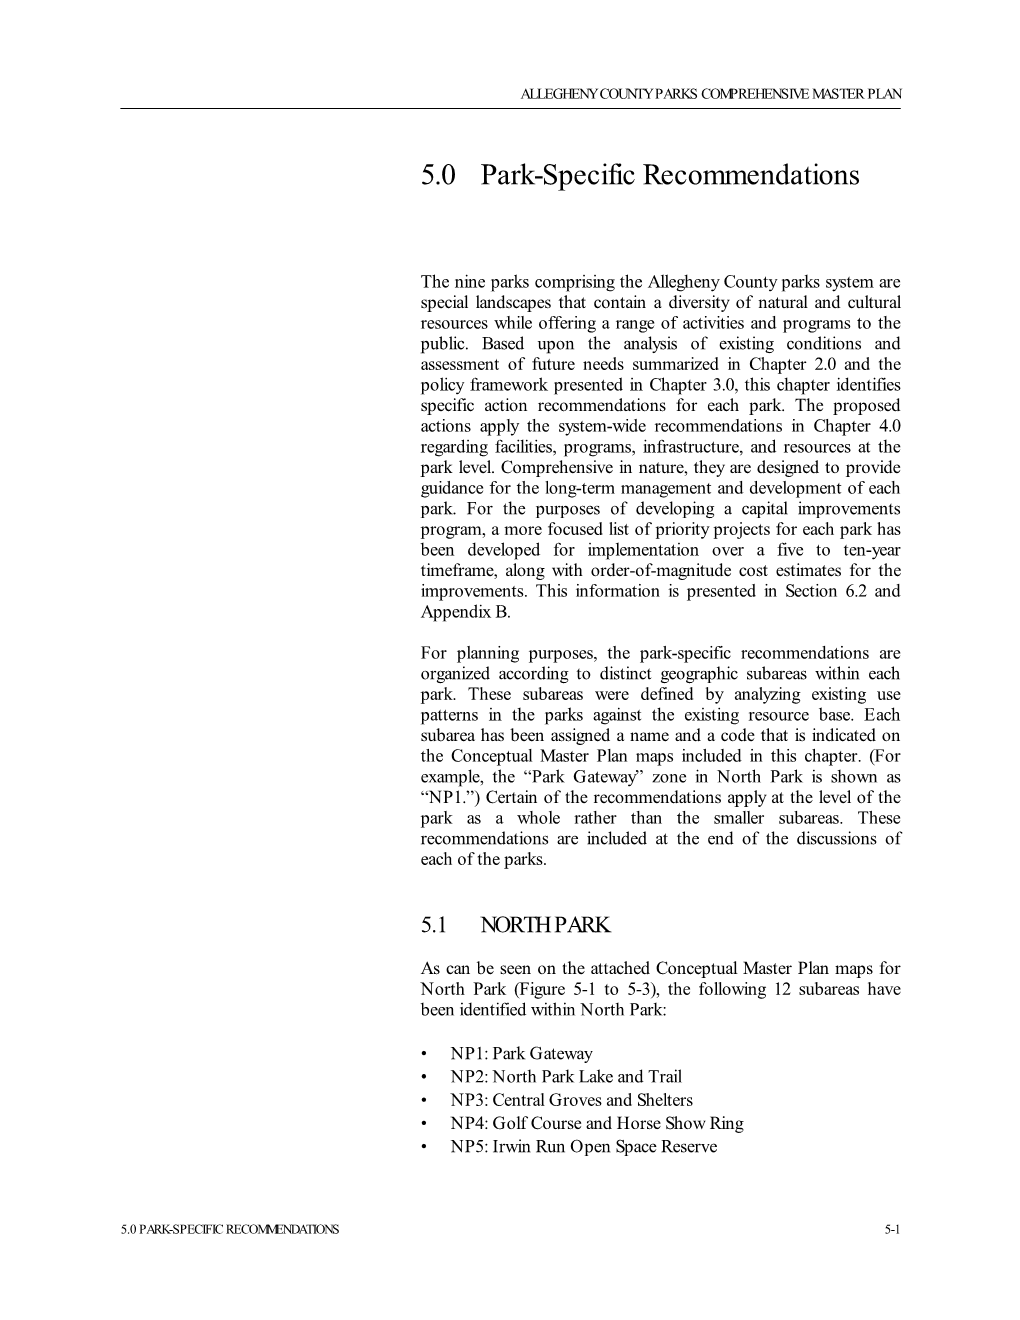 5.0 Park-Specific Recommendations